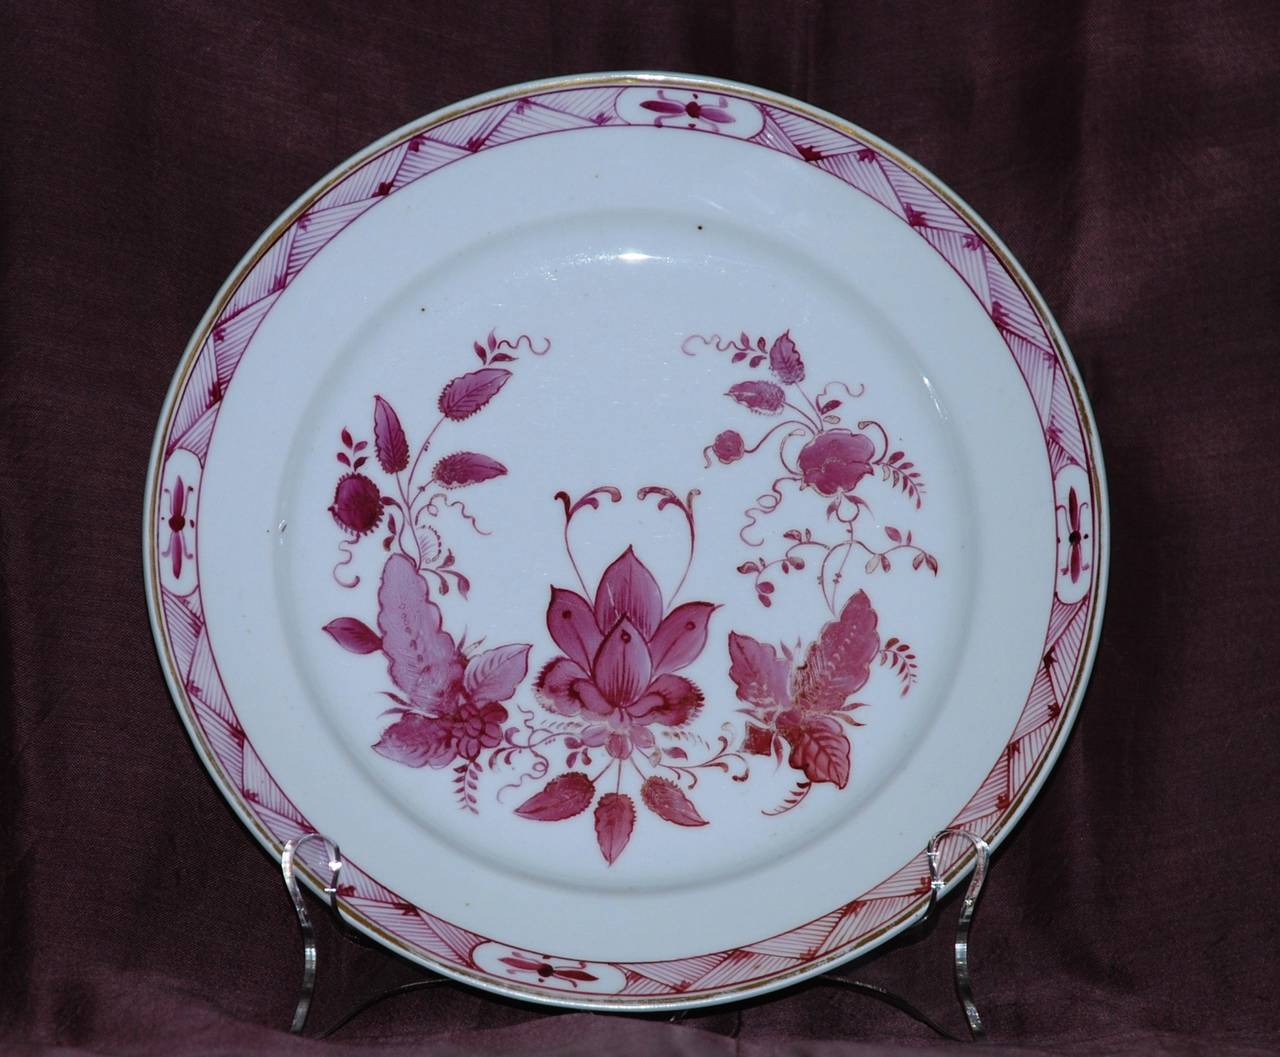 Pink, white and gilt Russian floral porcelain plate. Russian porcelain plate of pink/magenta and white indianische floral design with basket weave border and gilt rim. Moscow. Fabrica Gospodina Gulina, circa 1830-1850. Marking: Signed 